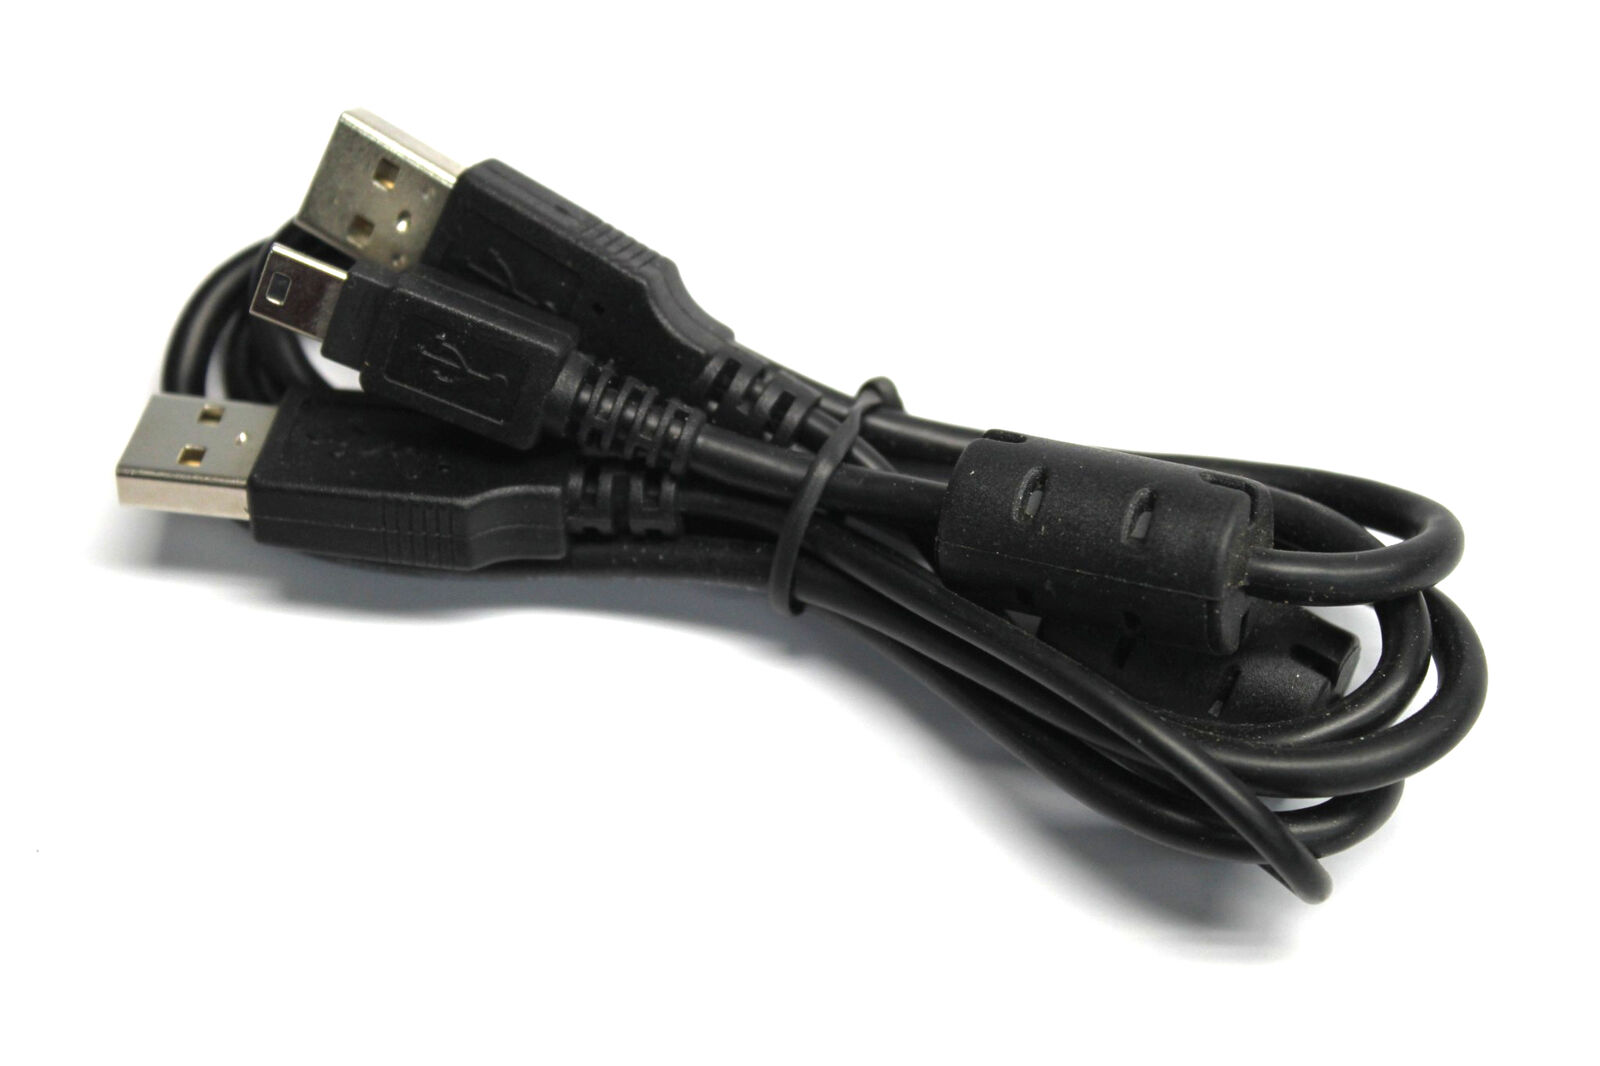 USB 2.0 Data Cable Standard Type A to Mini Pin Wire Cord for Hard Disk Drive HDD